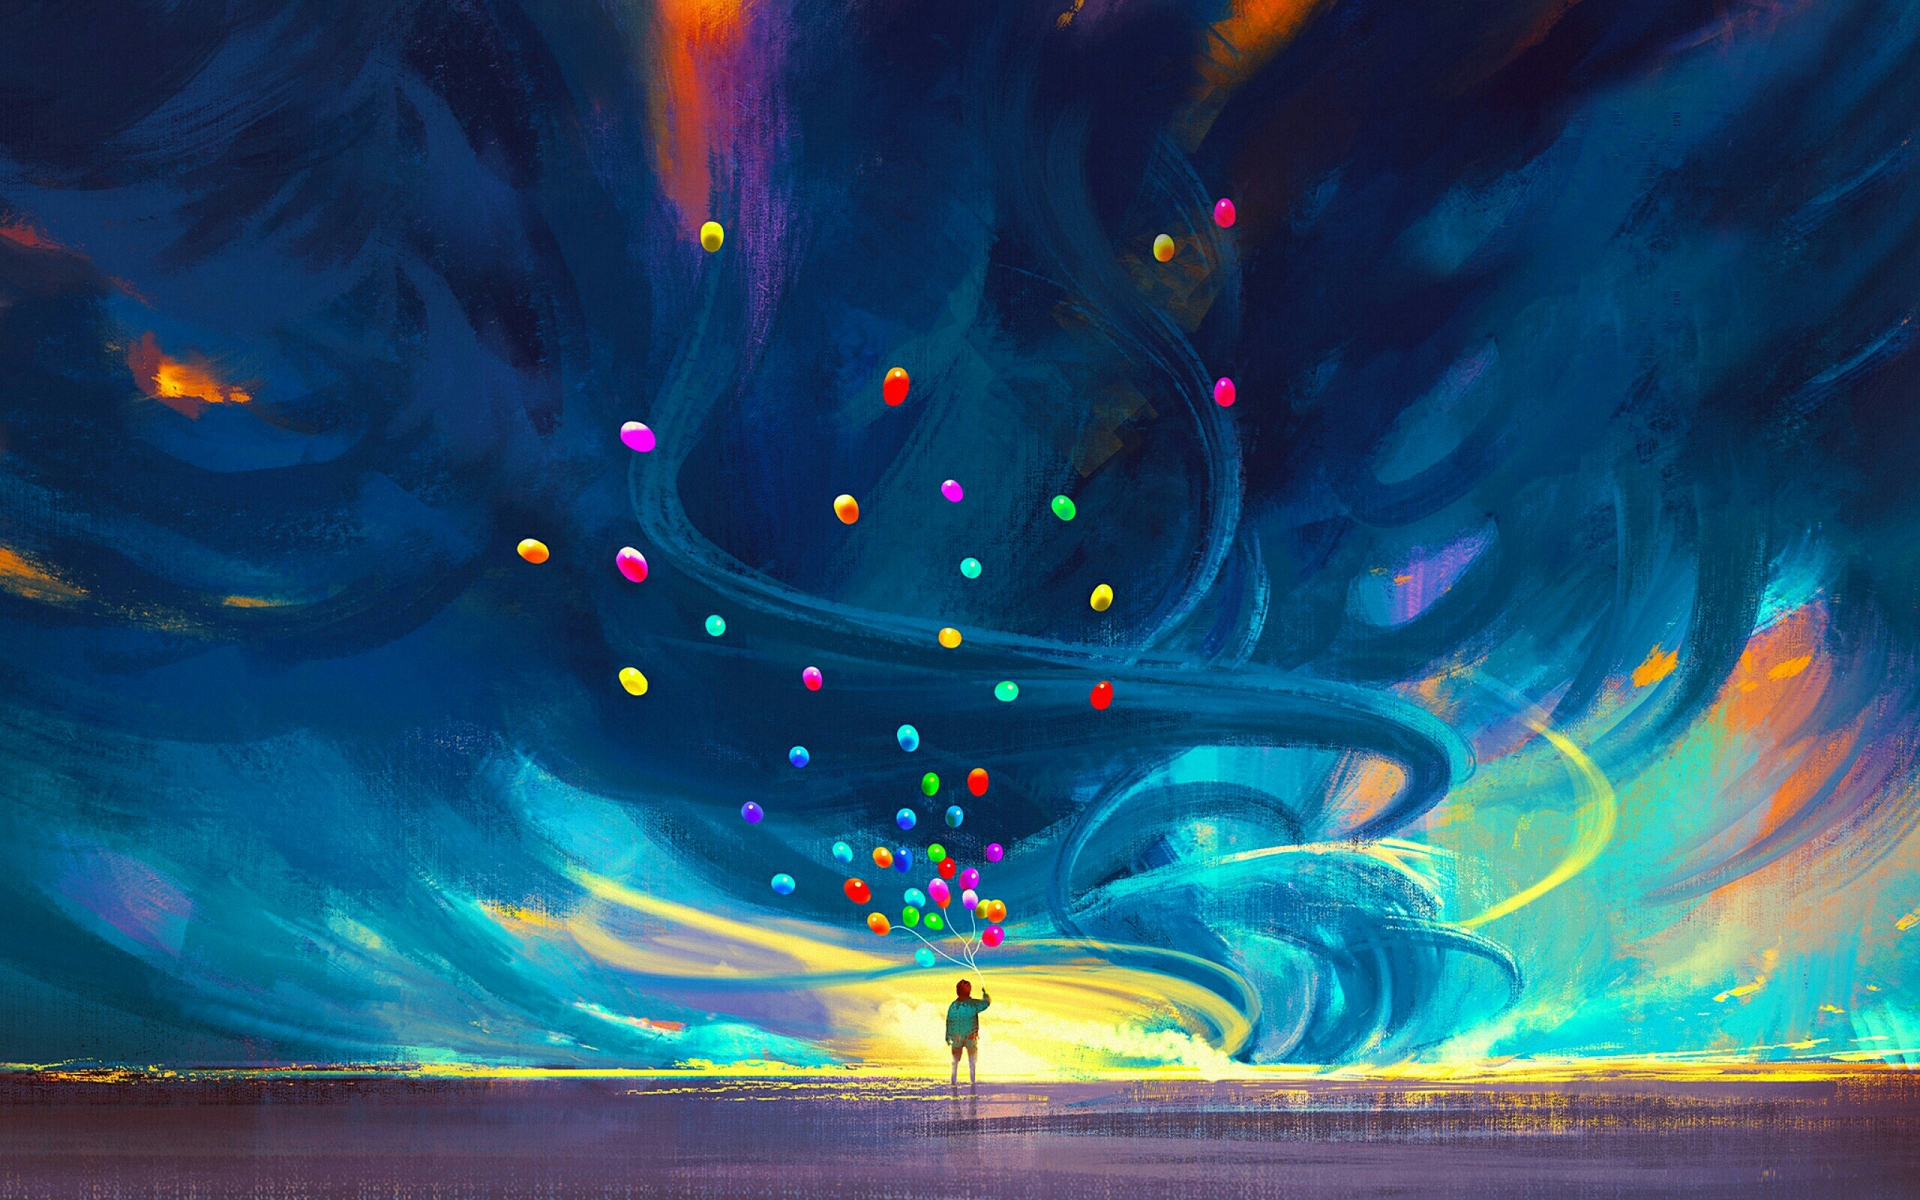 Balloon Child Painting Drawing Cloud 1920x1200